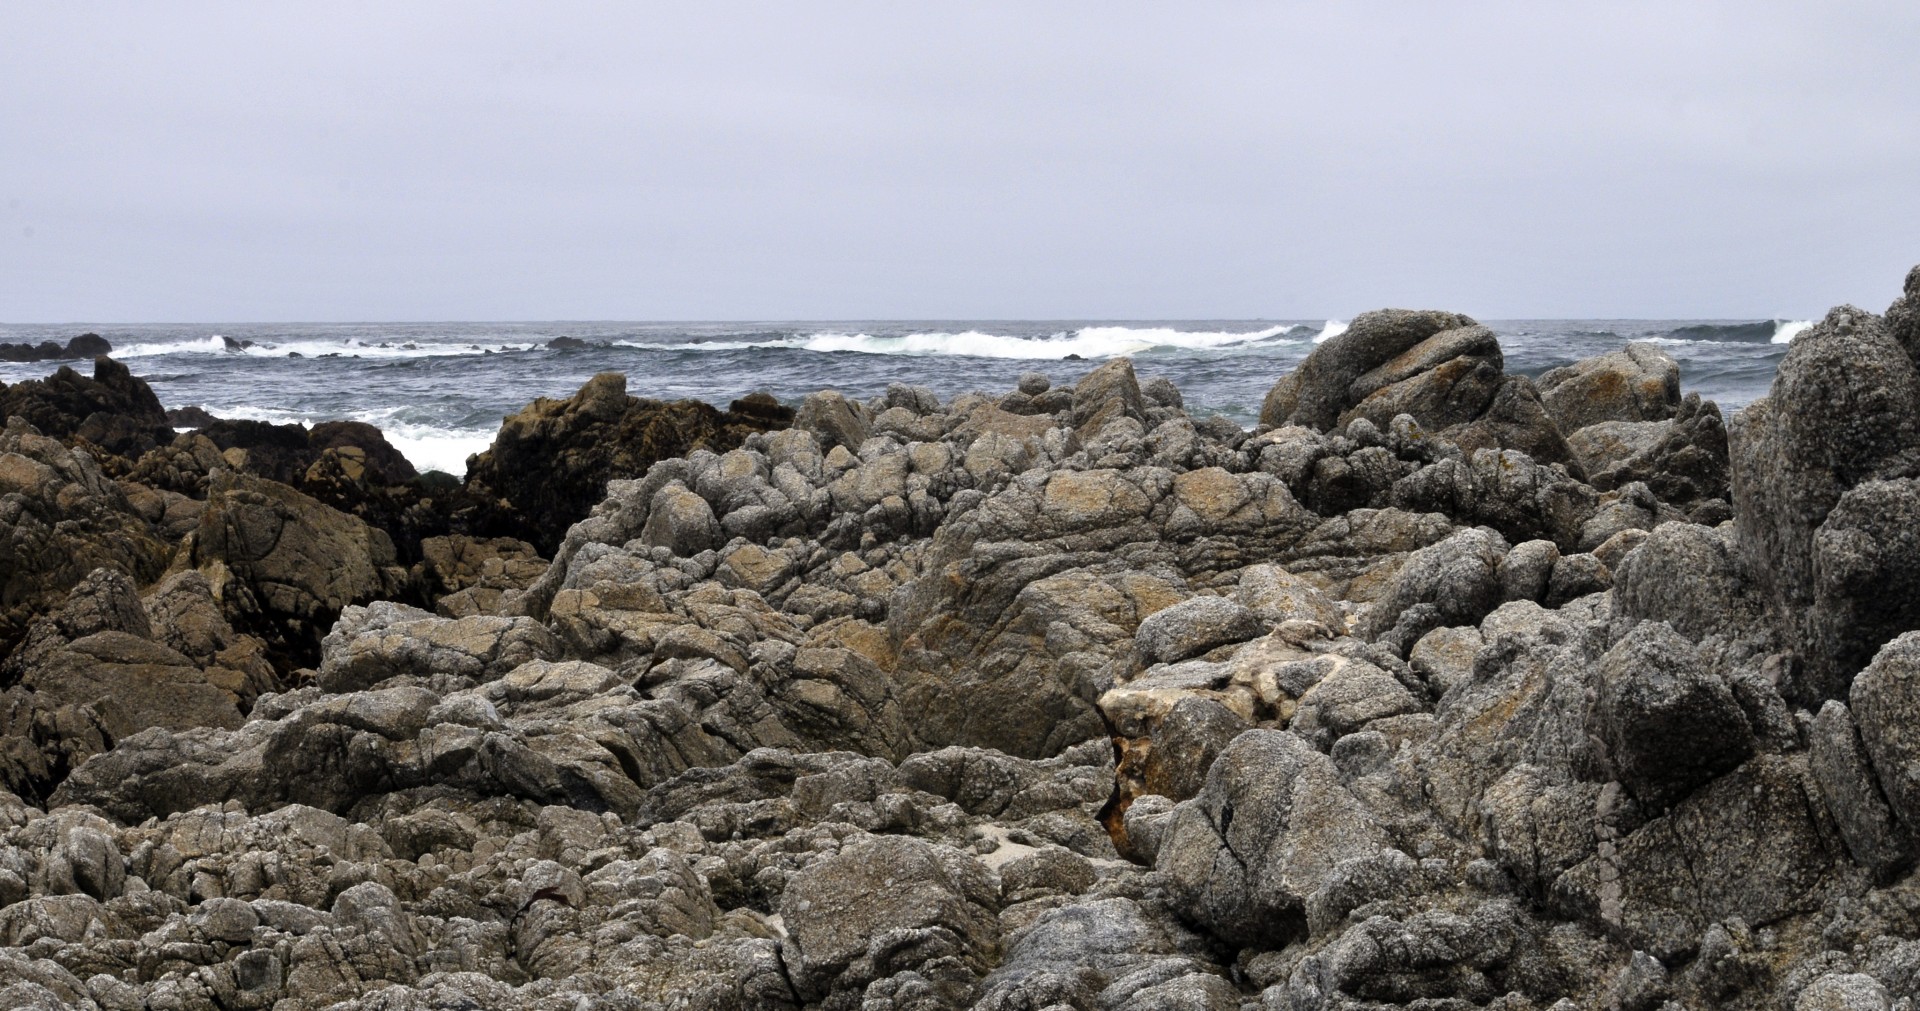 View of the ocean waves from the top of a rocky shoreline at Asilomar State Beach, California